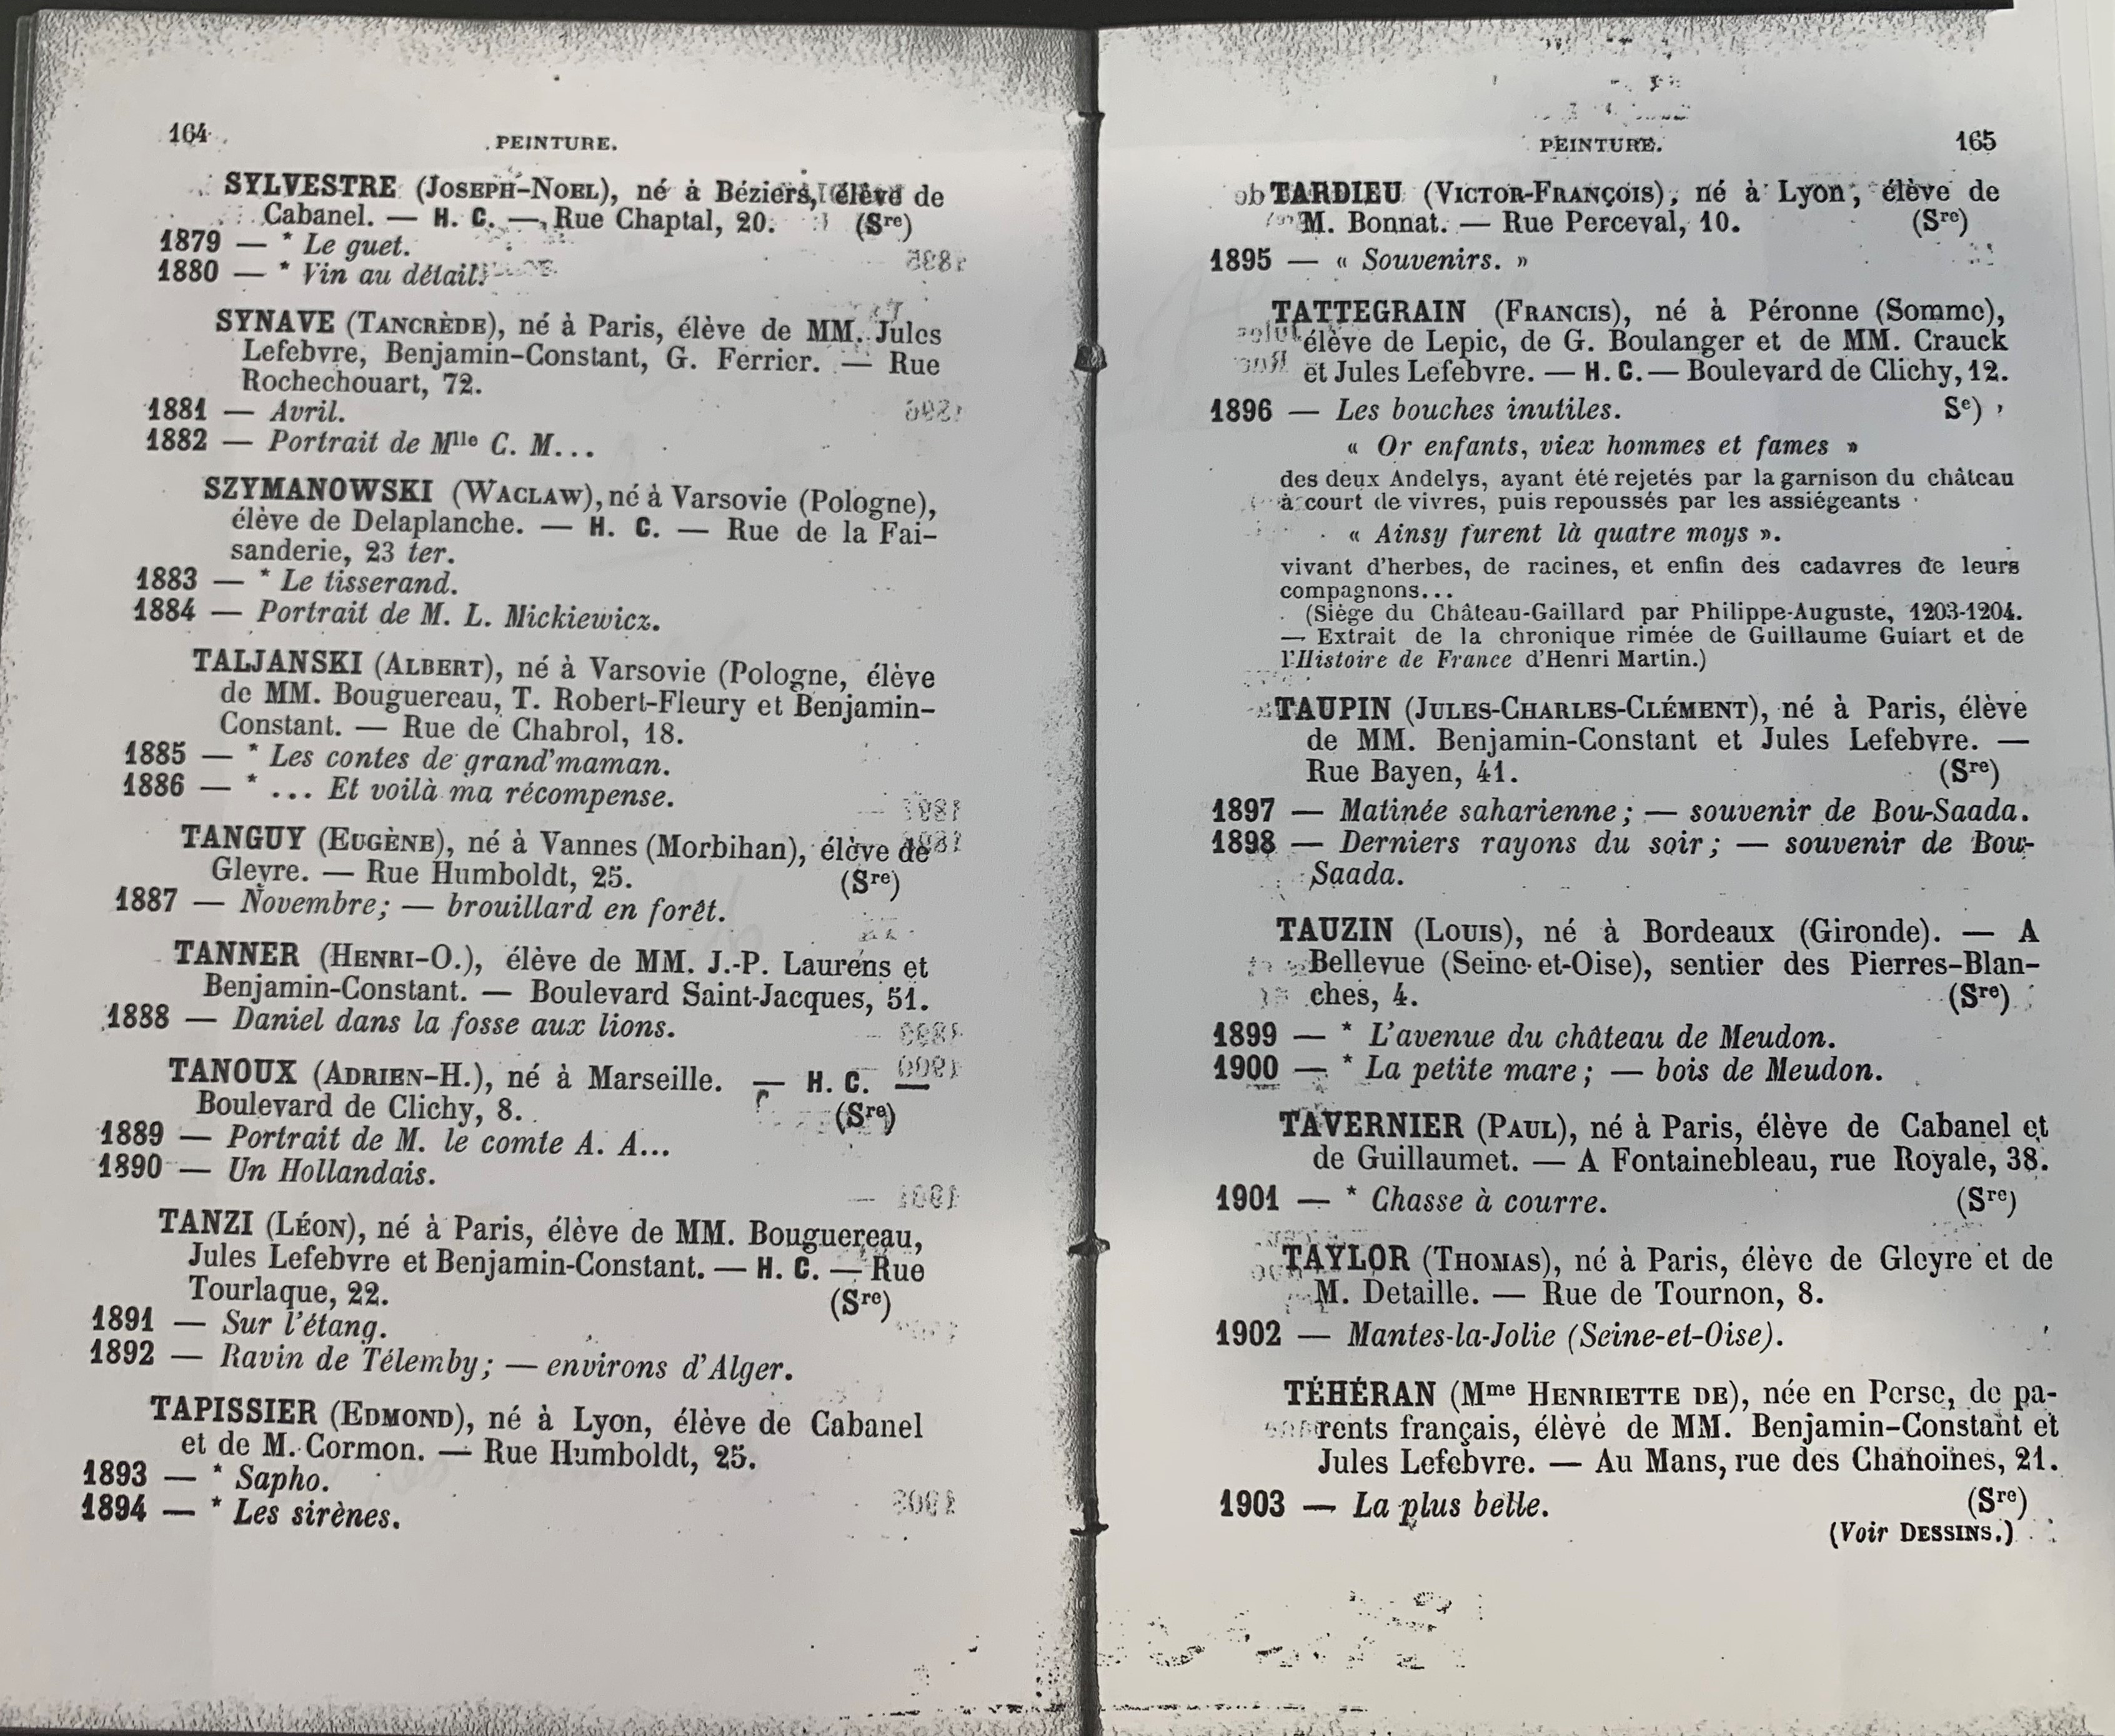 Extract from the catalog of the 1896 show